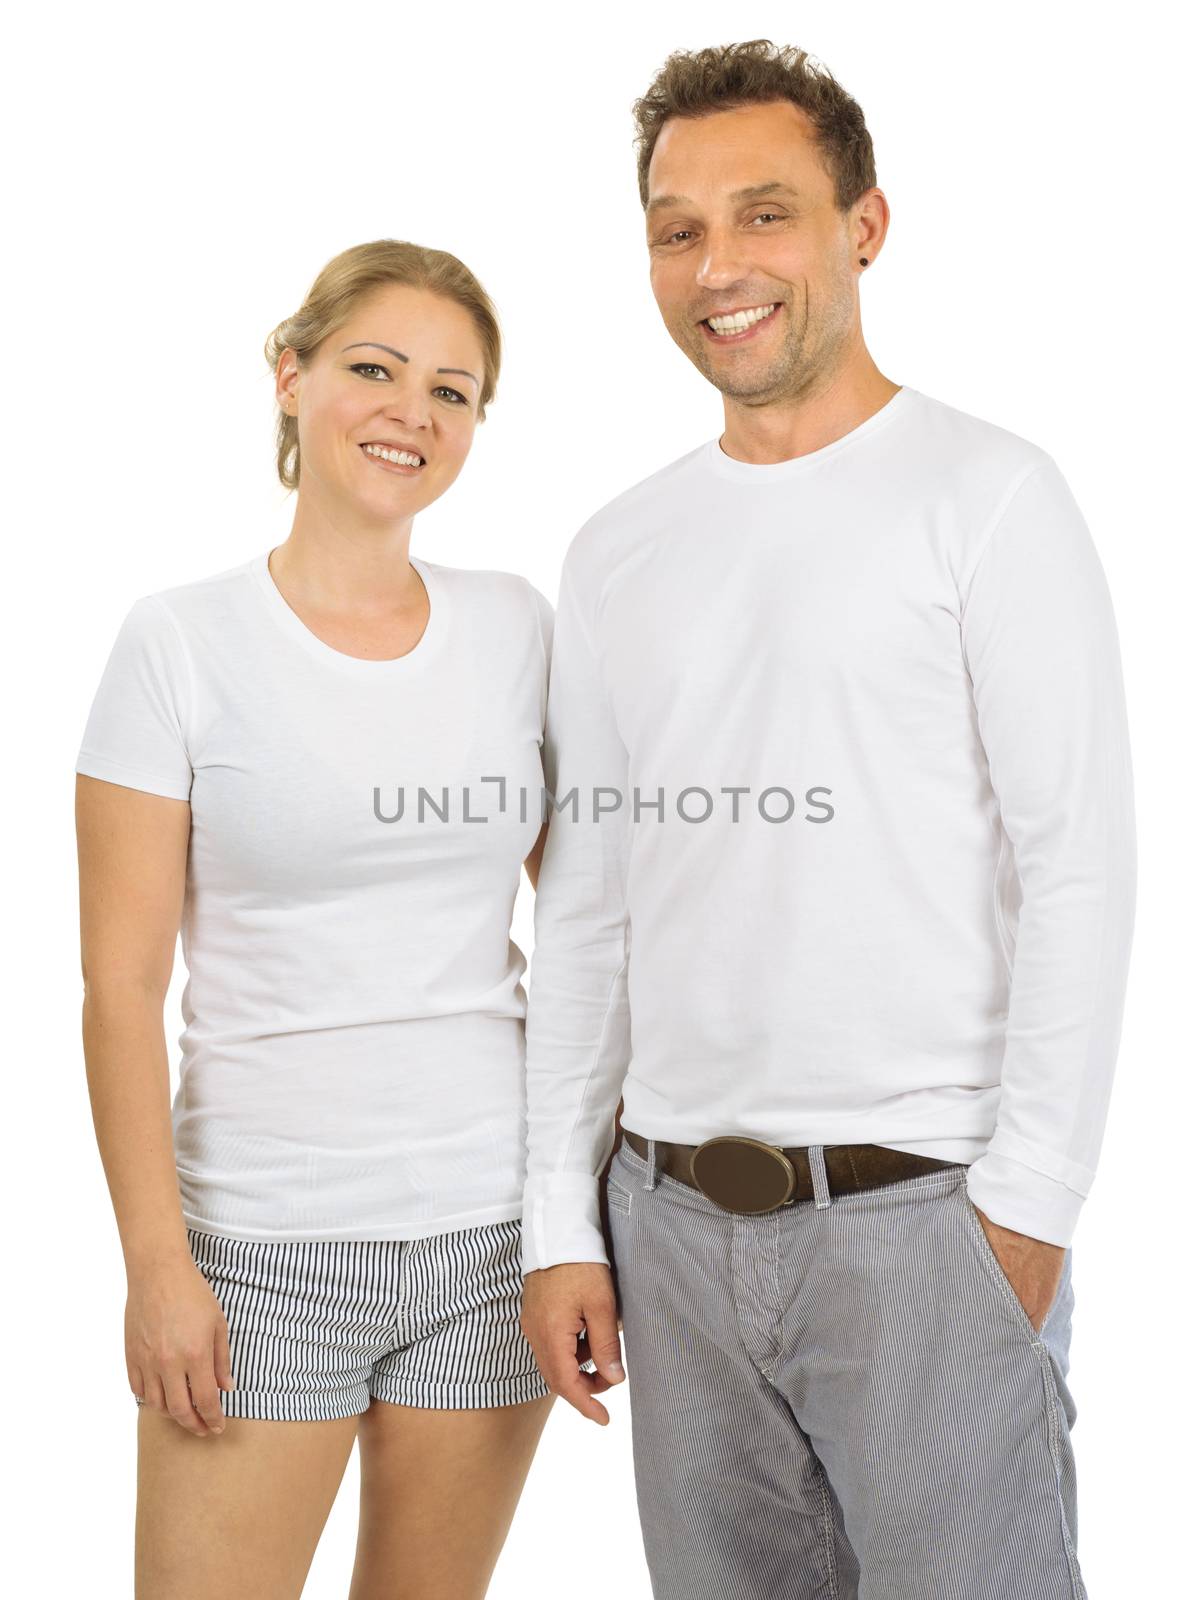 Photo of a woman and man posing with blank white shirts, ready for your artwork or design.
